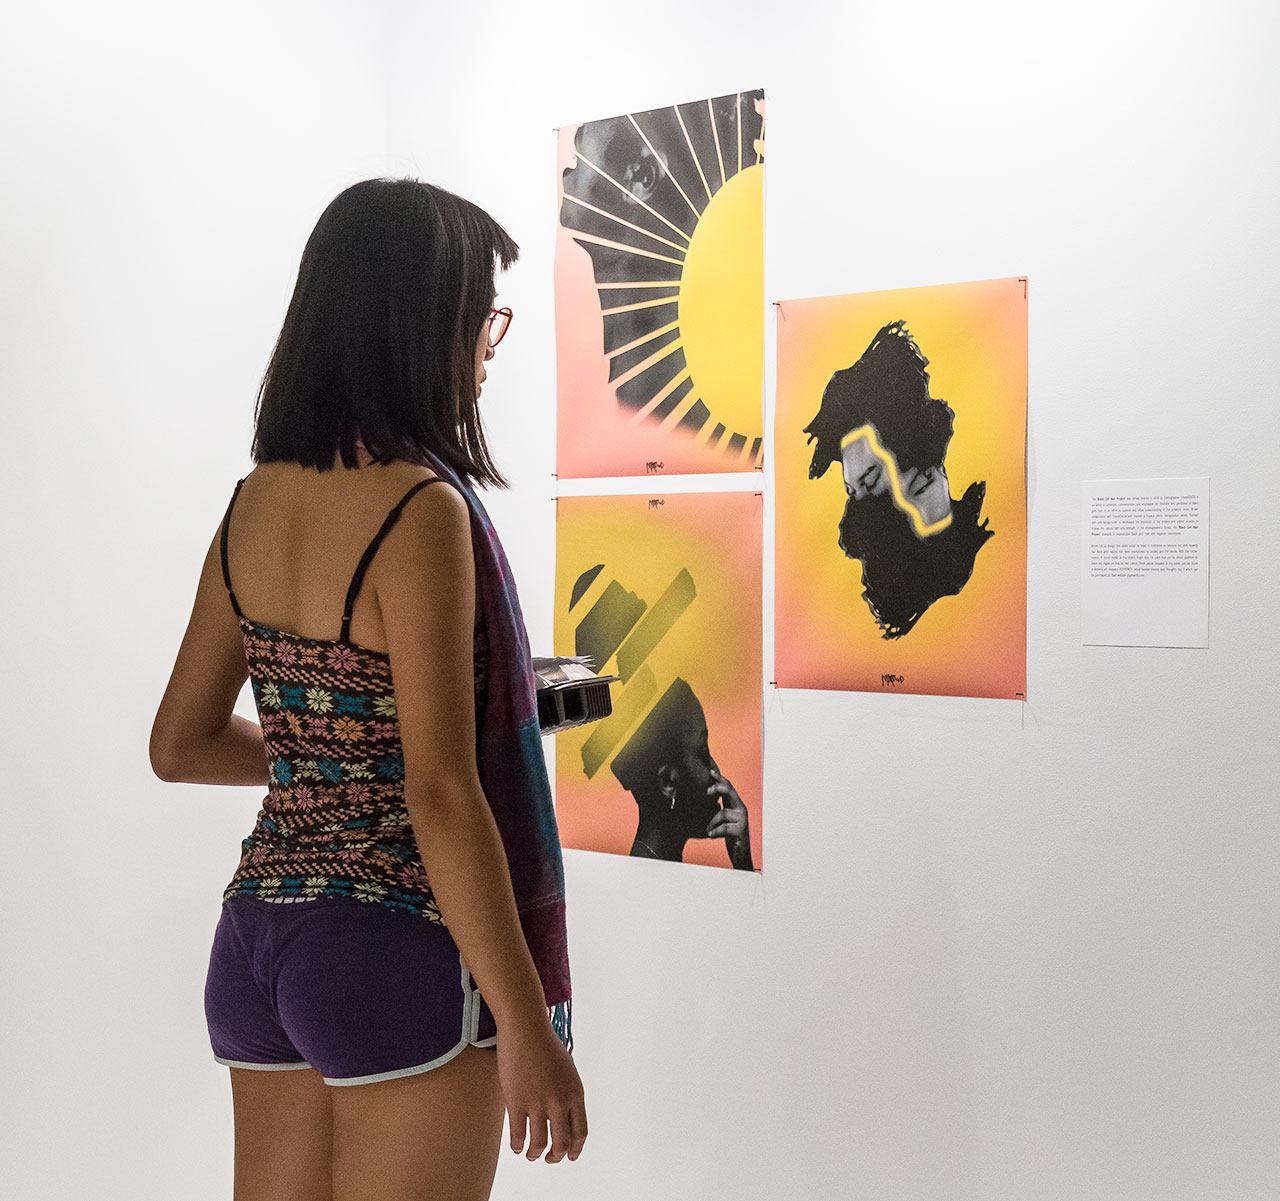 A student looking at artwork in a gallery.